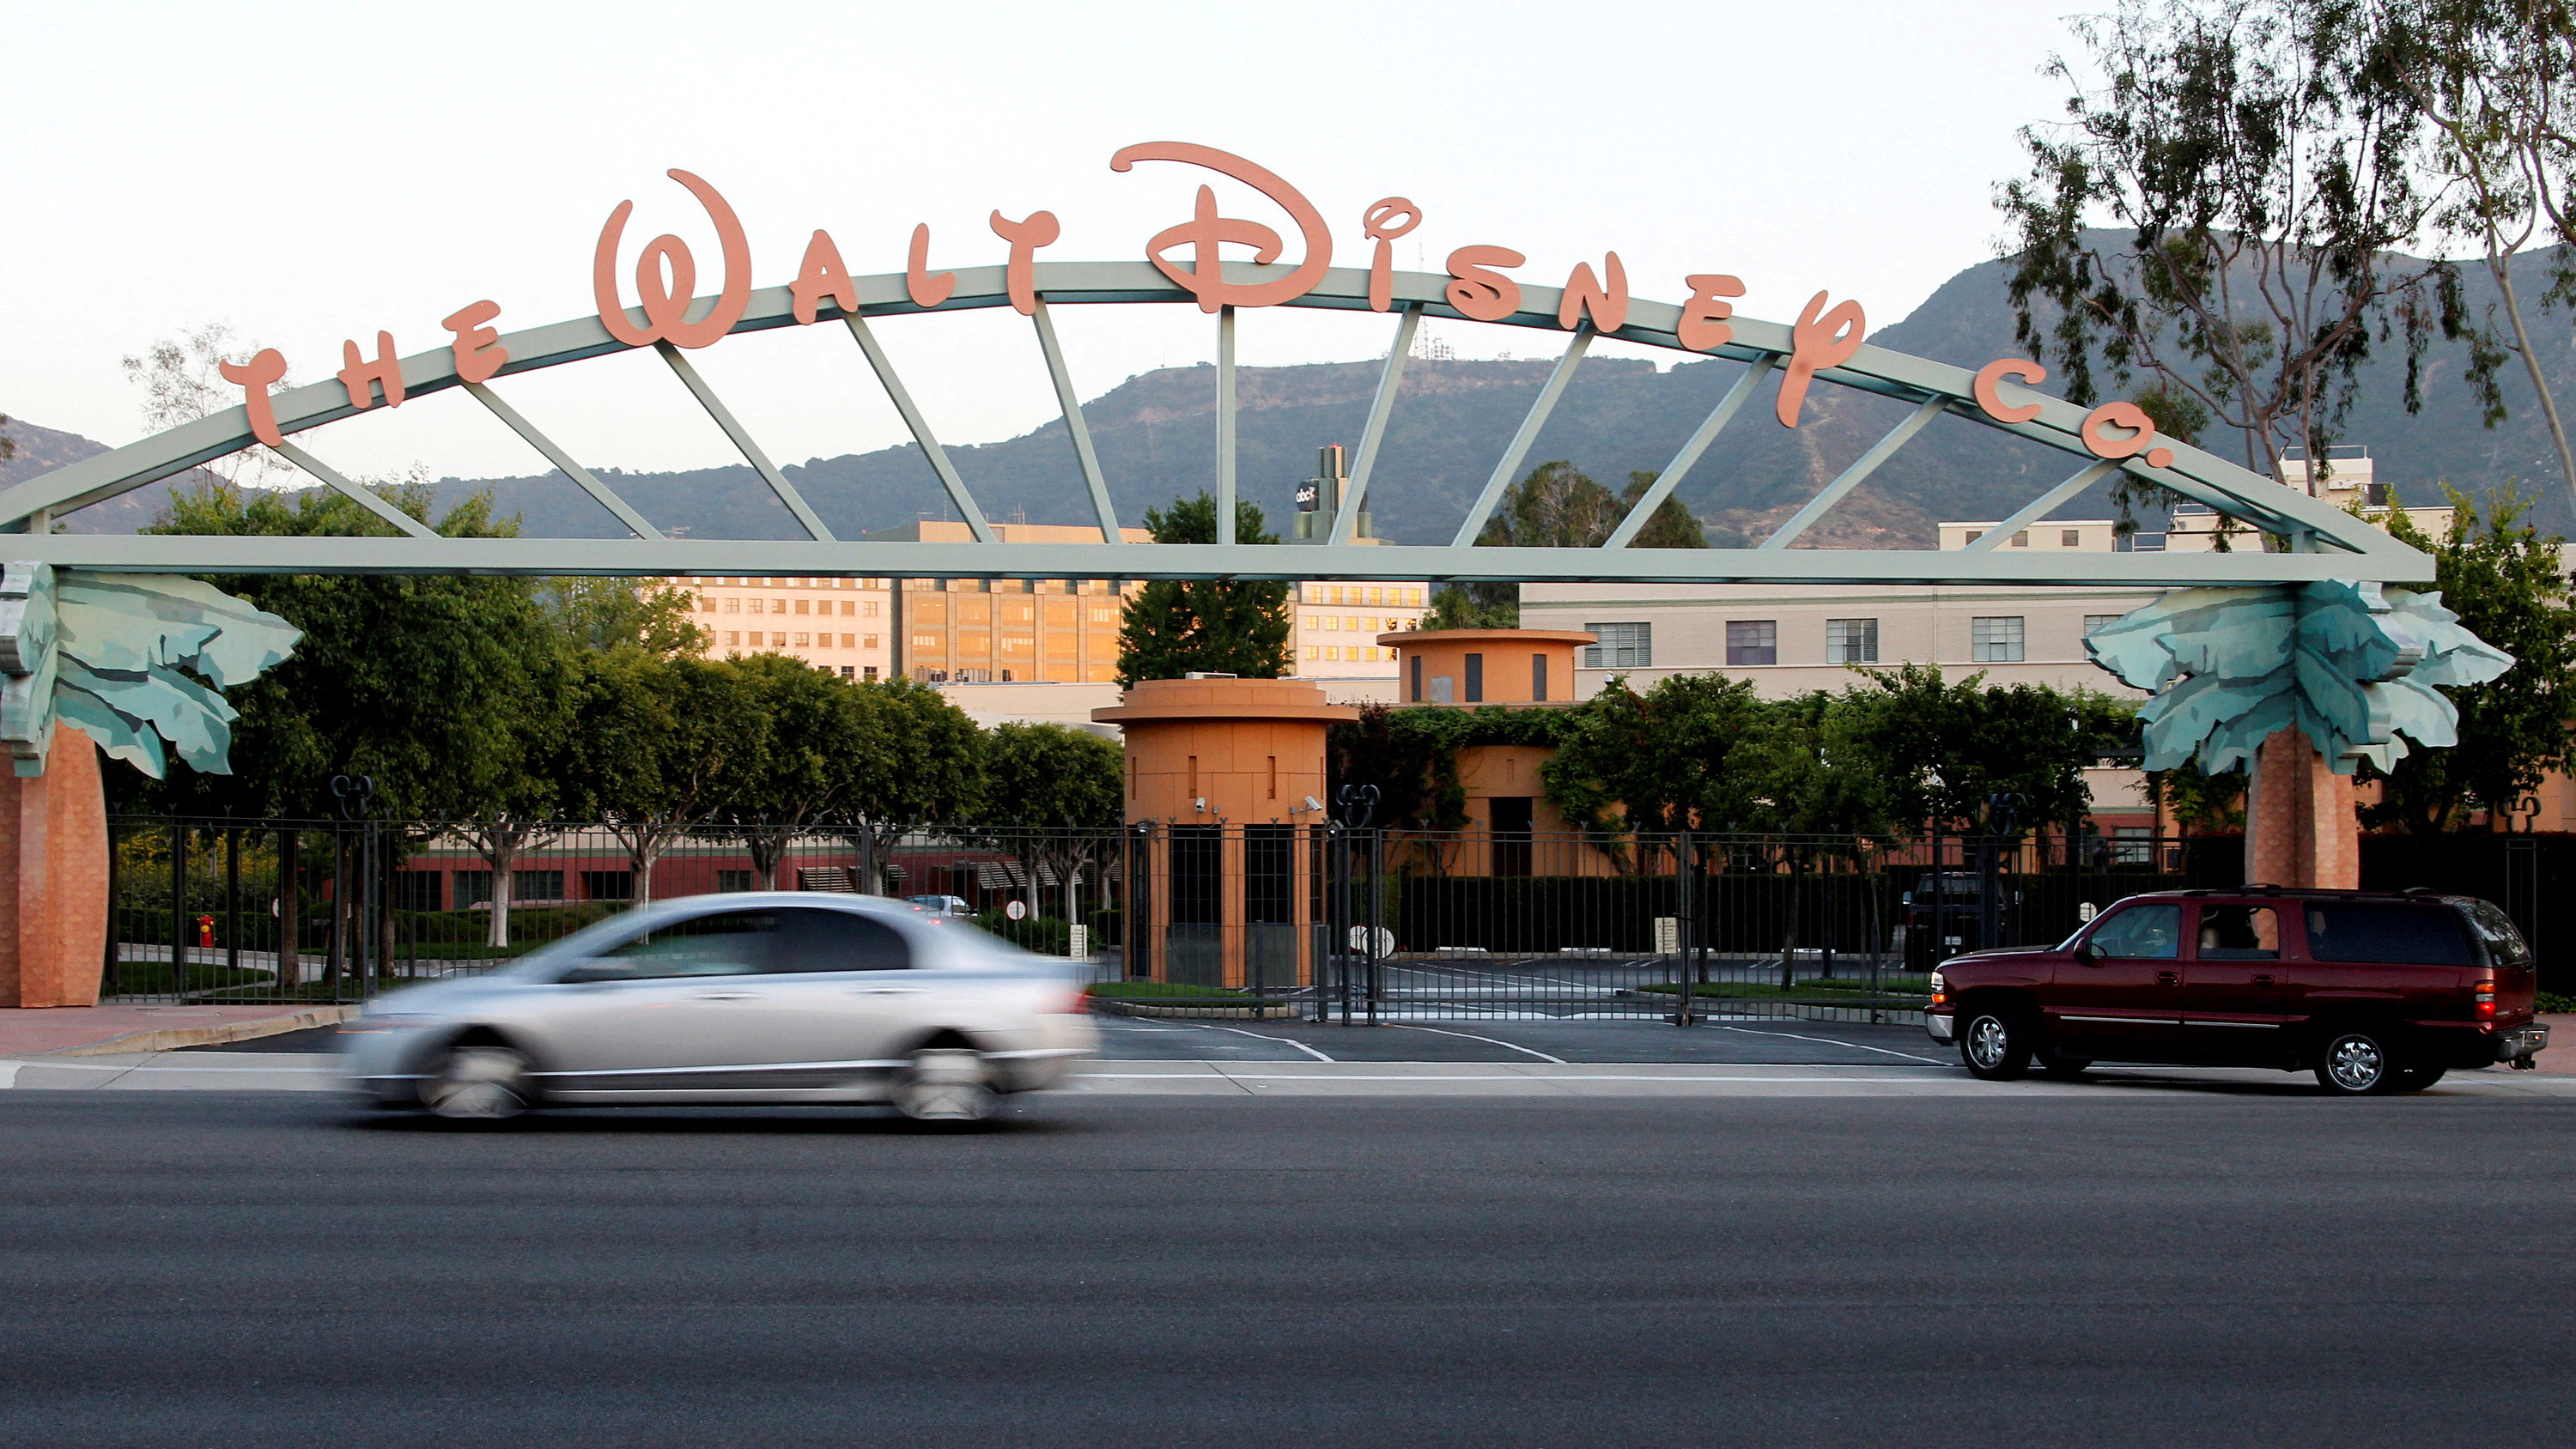 The signage at the main gate of The Walt Disney Co. is pictured in Burbank